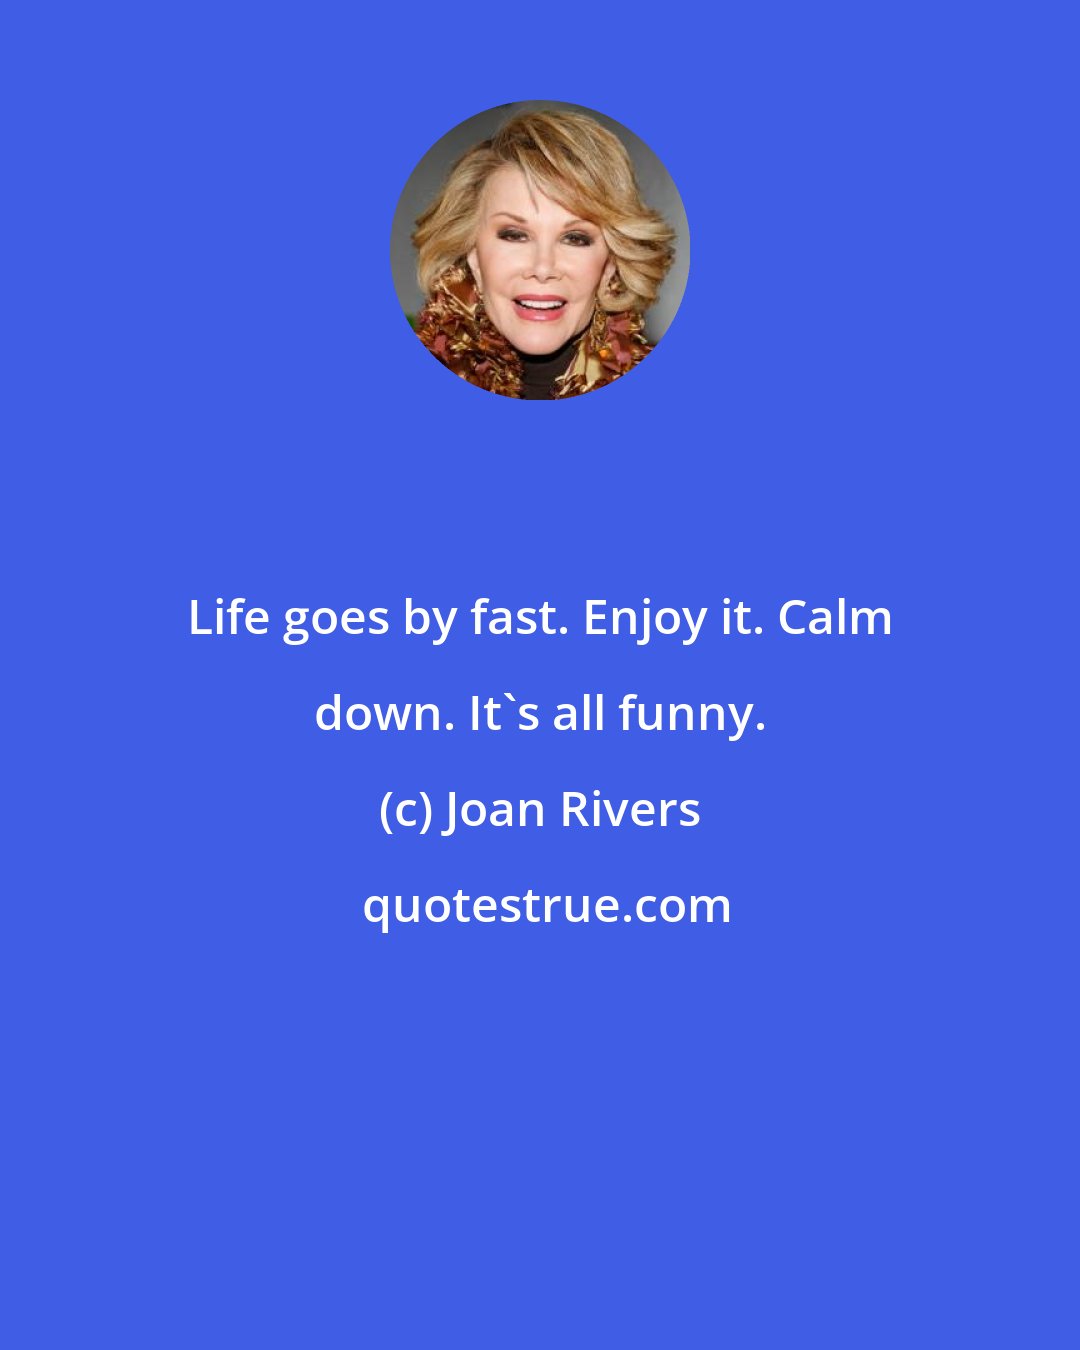 Joan Rivers: Life goes by fast. Enjoy it. Calm down. It's all funny.